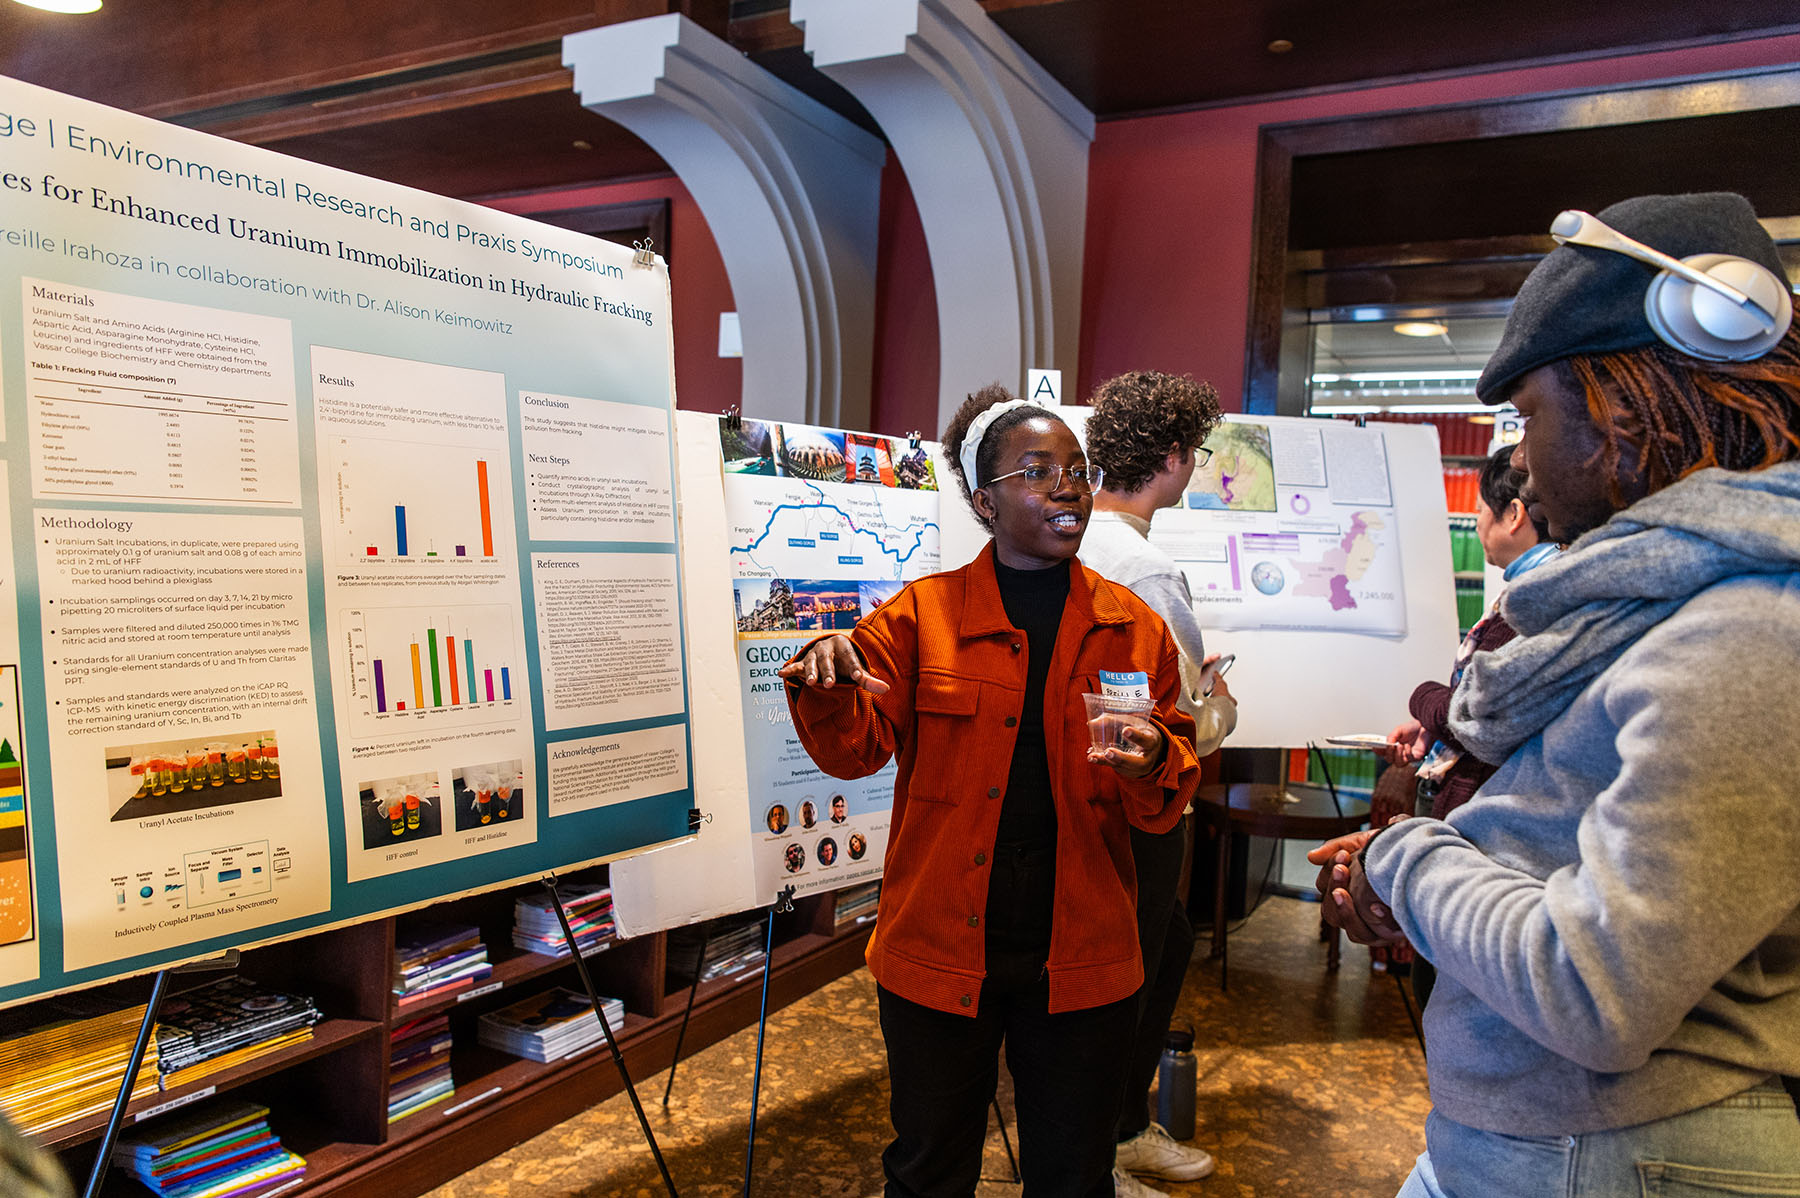 Person in a red sweater is pointing to a poster presentation on an easel while another person looks on.